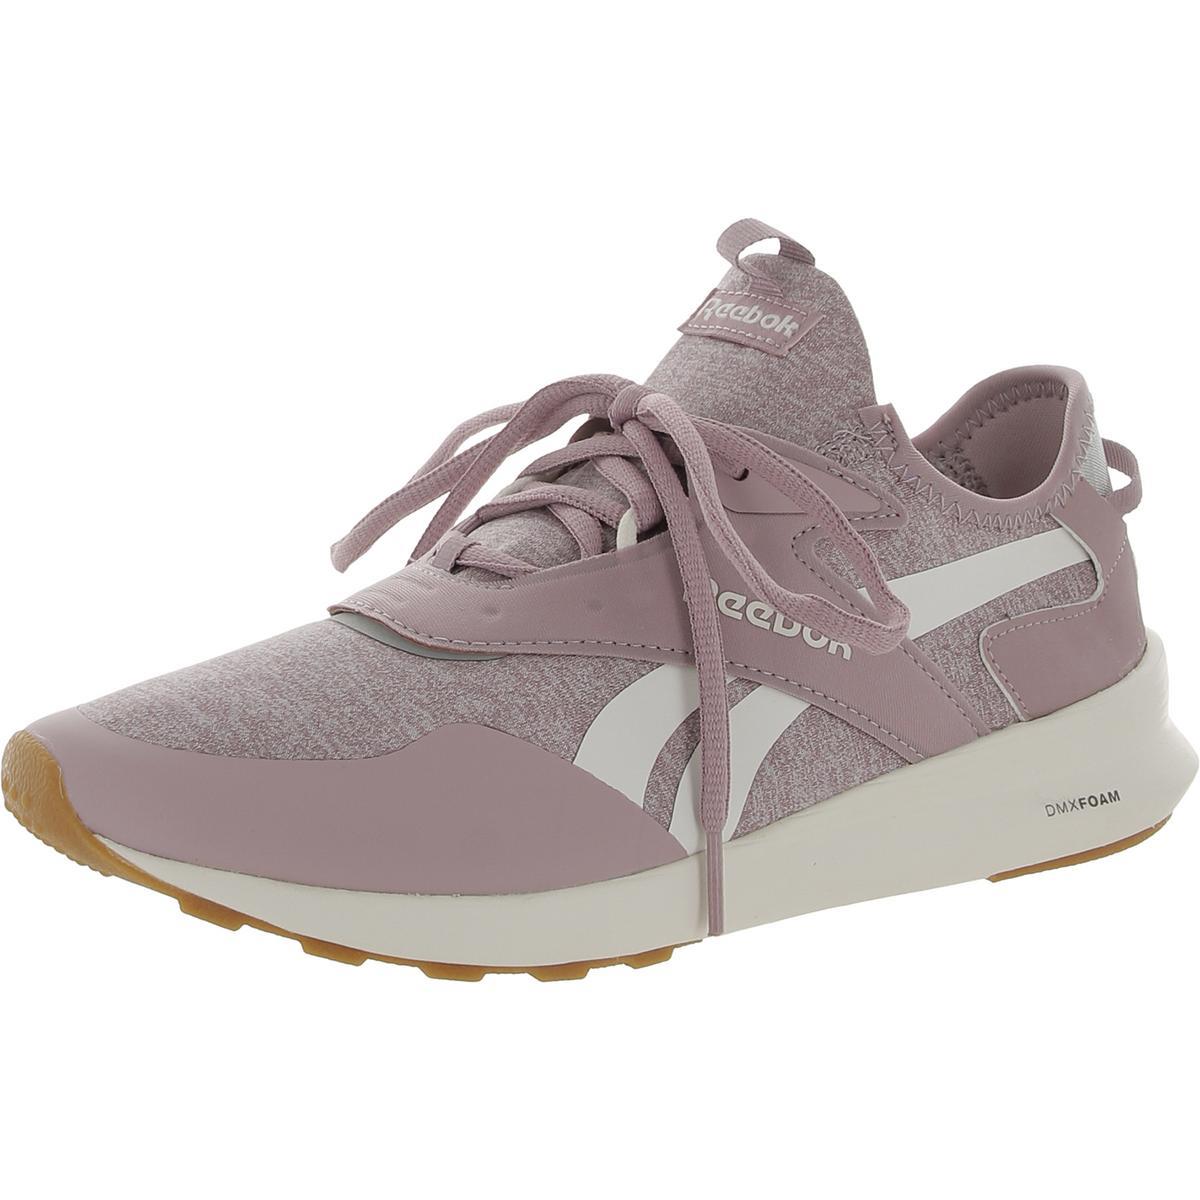 Reebok Womens Spark Run Trainers Athletic and Training Shoes Sneakers Bhfo 8072 Lilac/Chalk/Metallic Silver